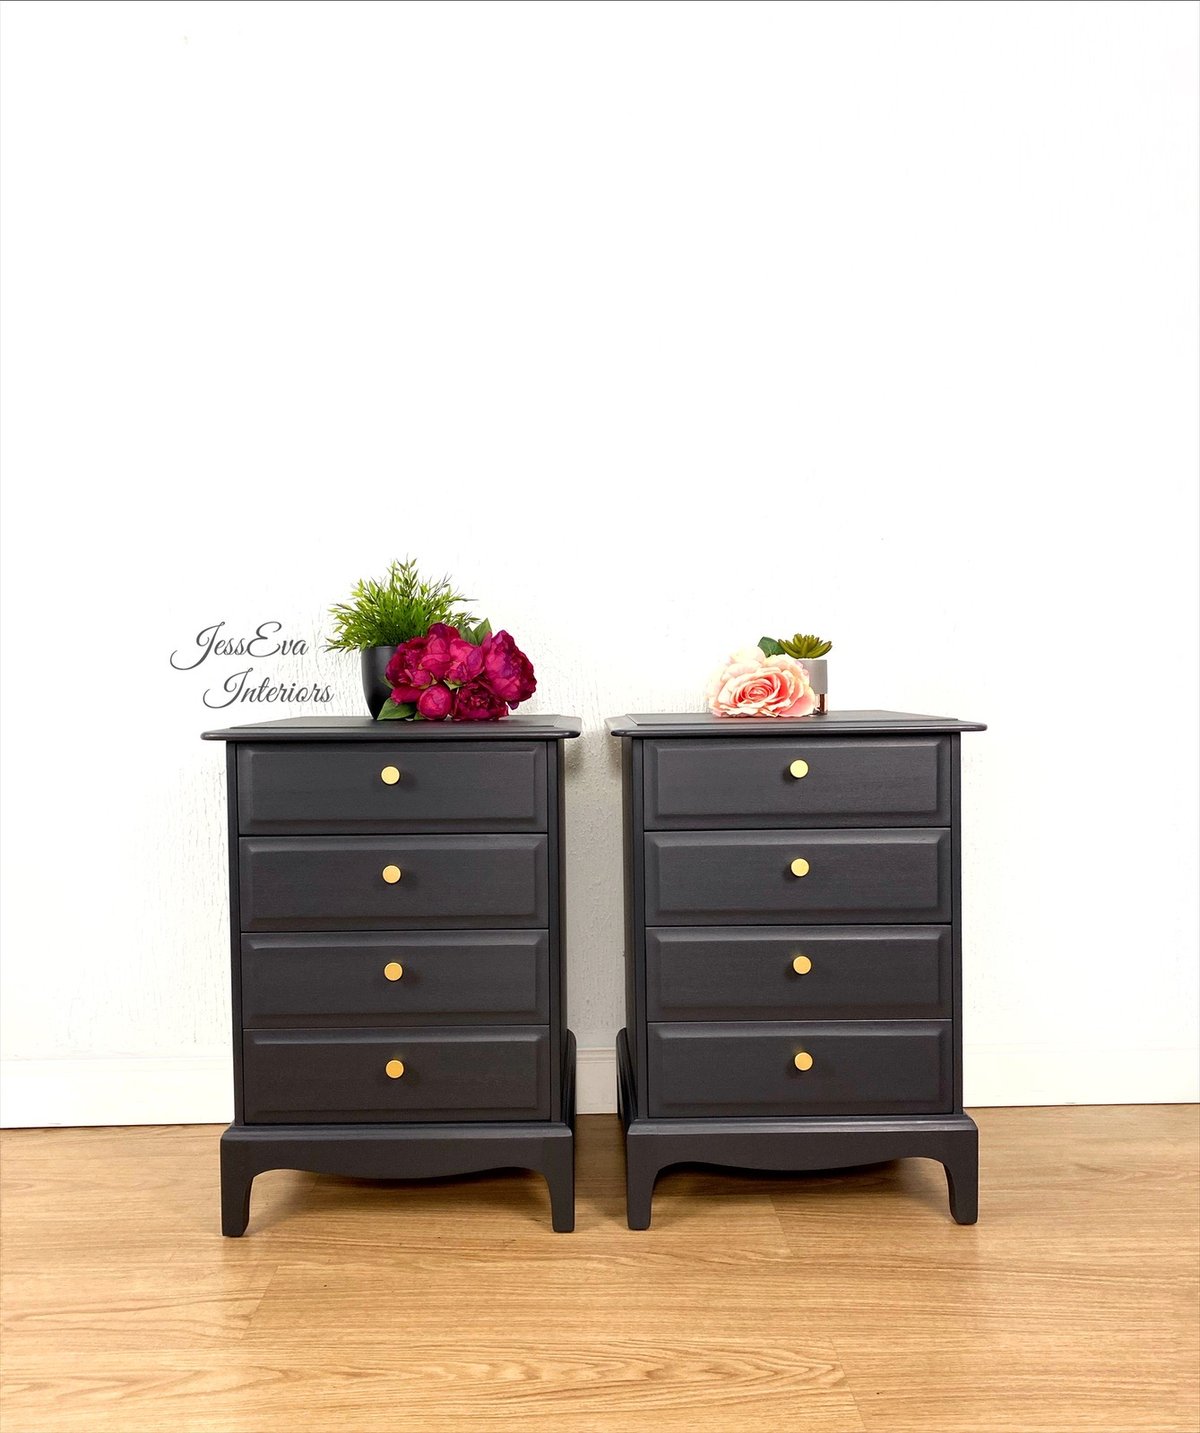 Stag Minstrel BEDSIDE TABLES / BEDSIDE CABINETS / CHEST OF DRAWERS painted in dark grey